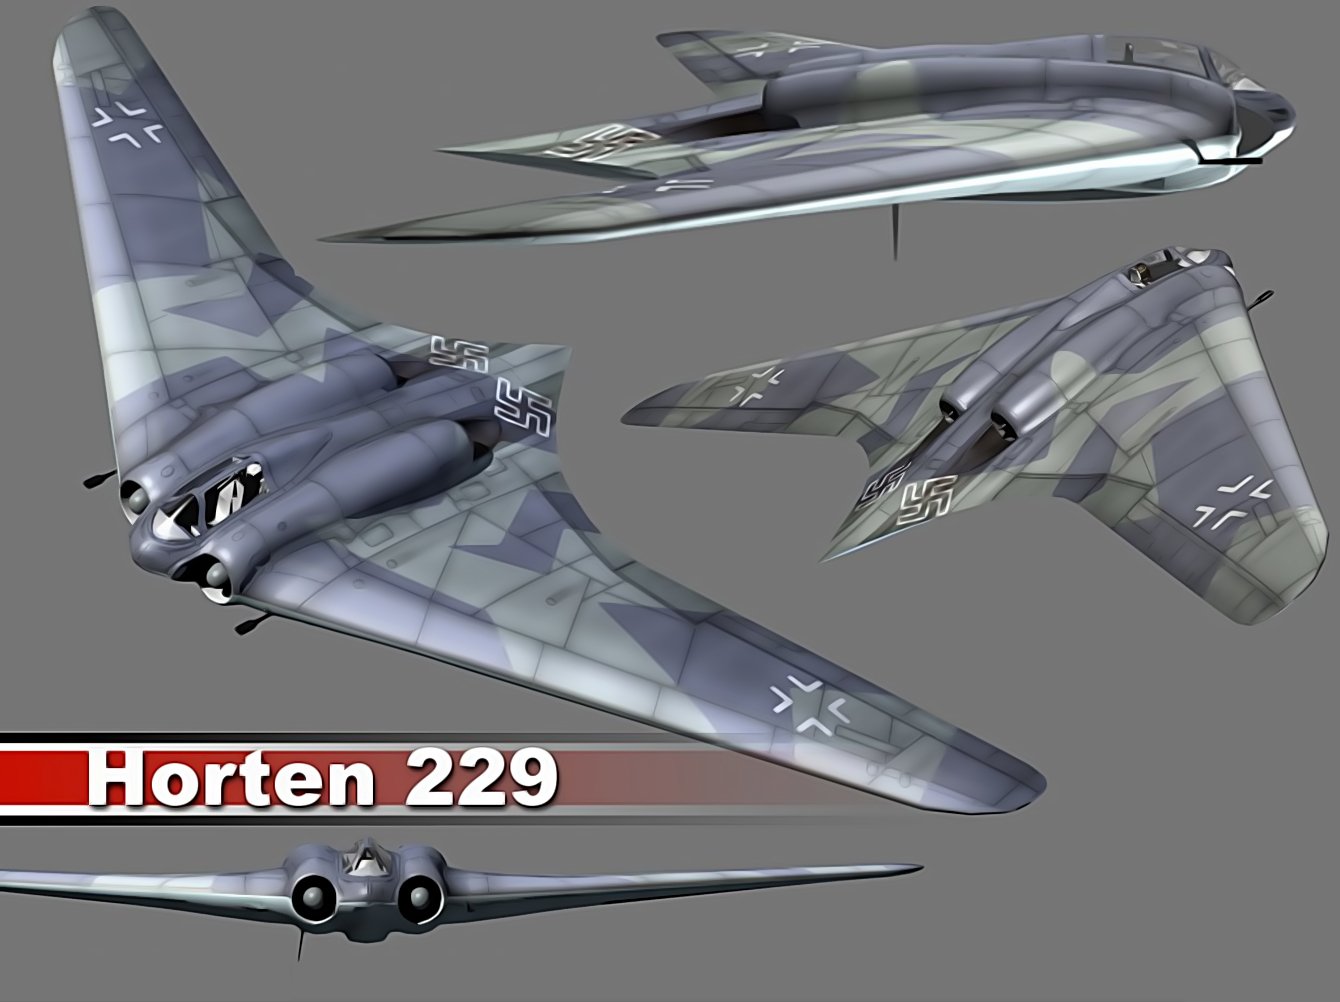 Horten Ho 229 Wallpaper And Background Image 1340x1002